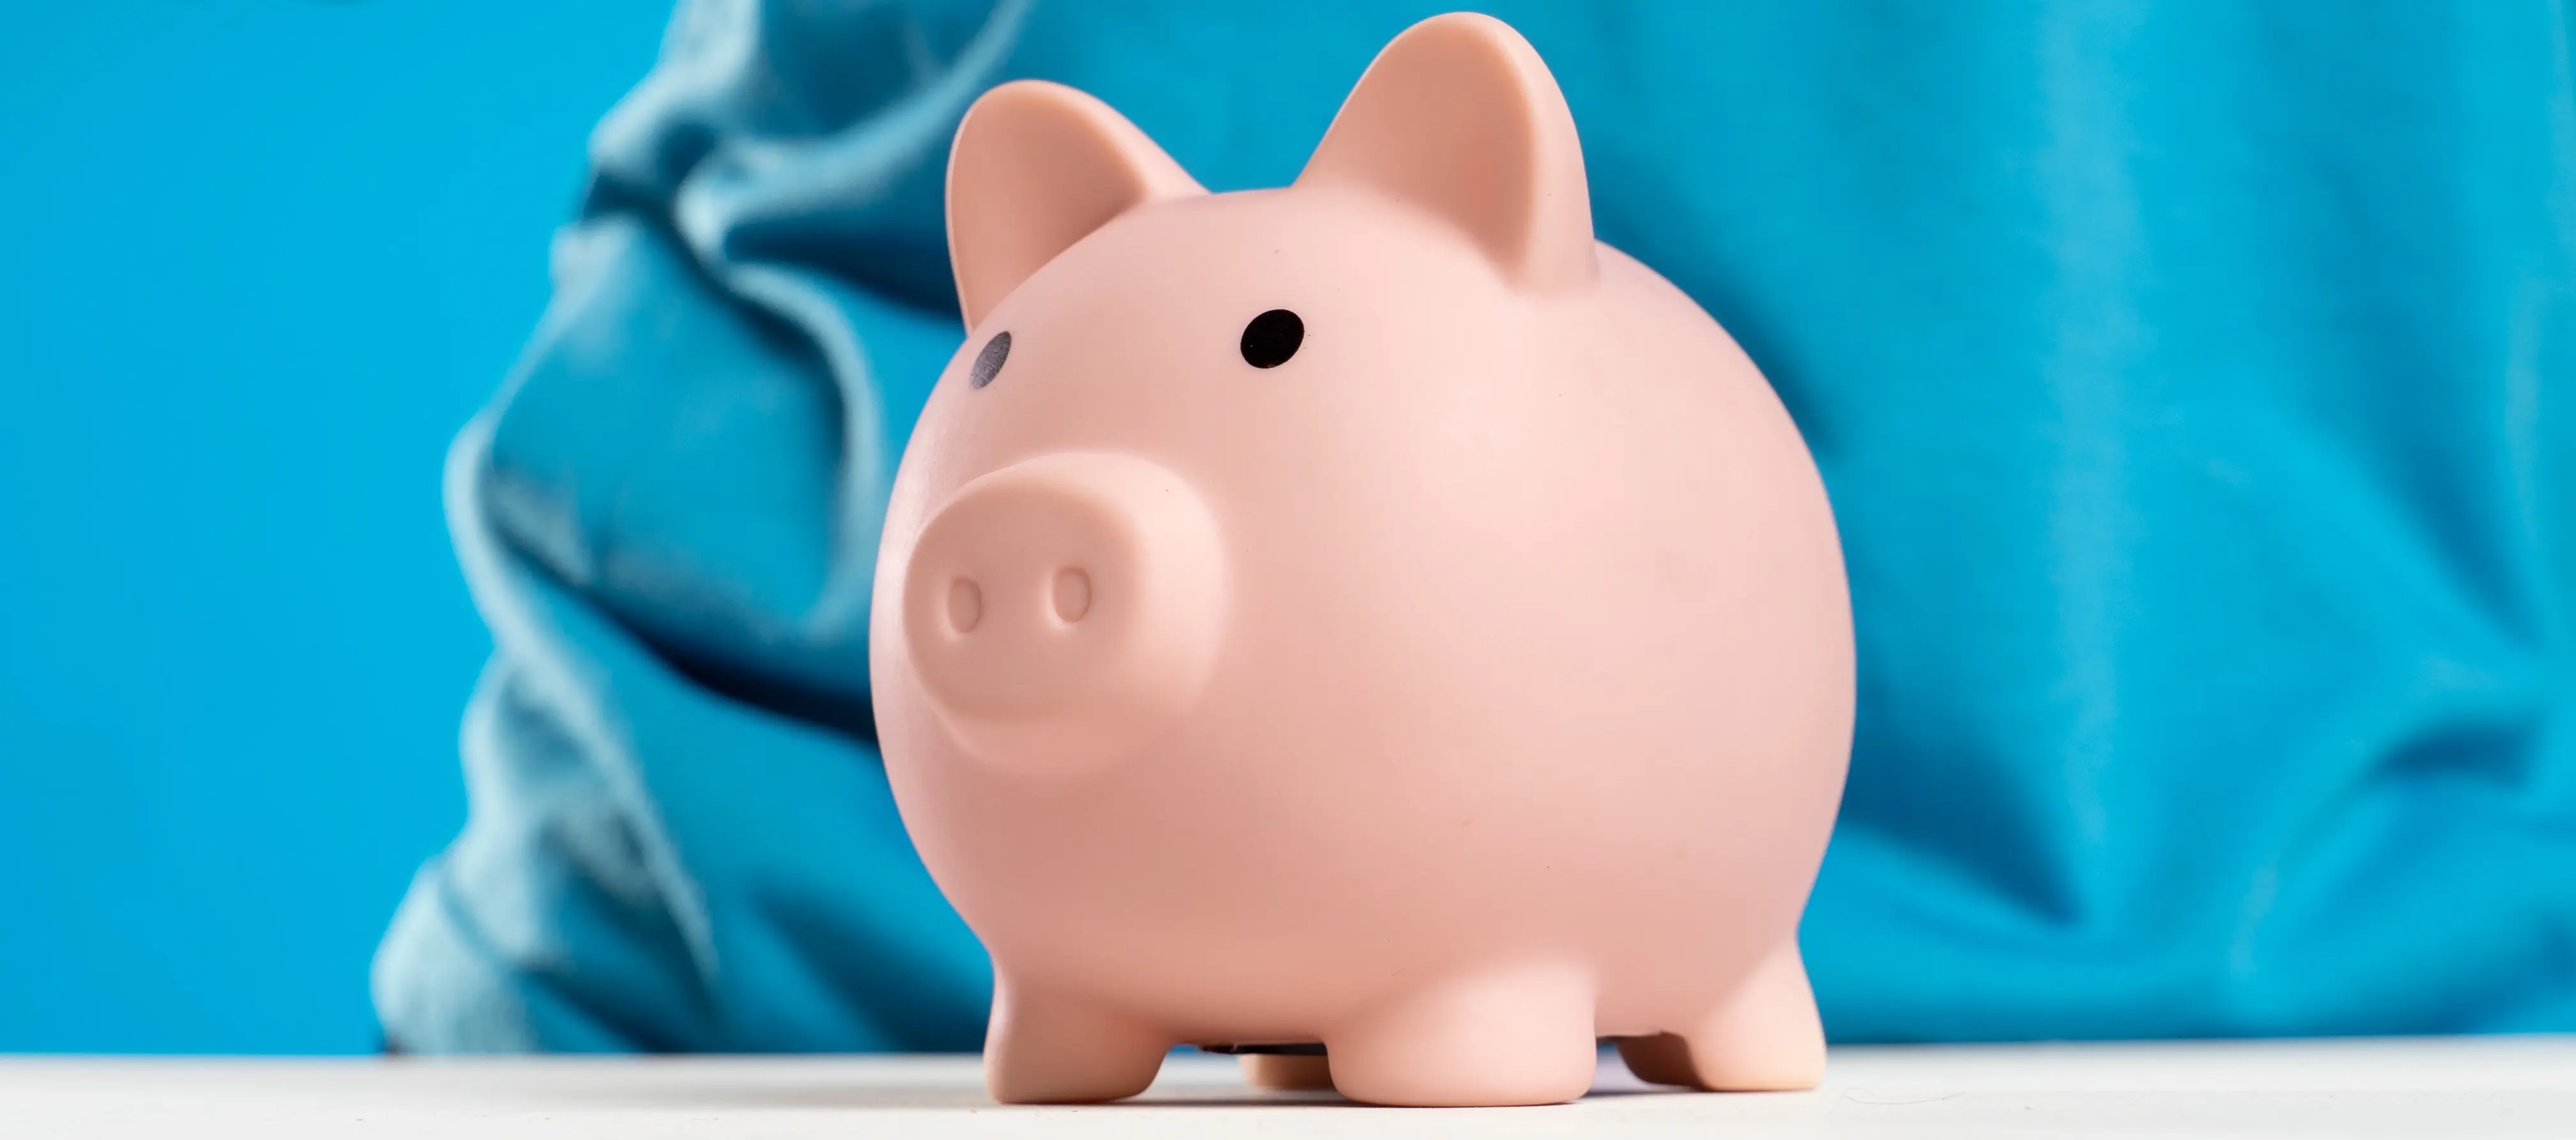 A white piggy bank on a blue background